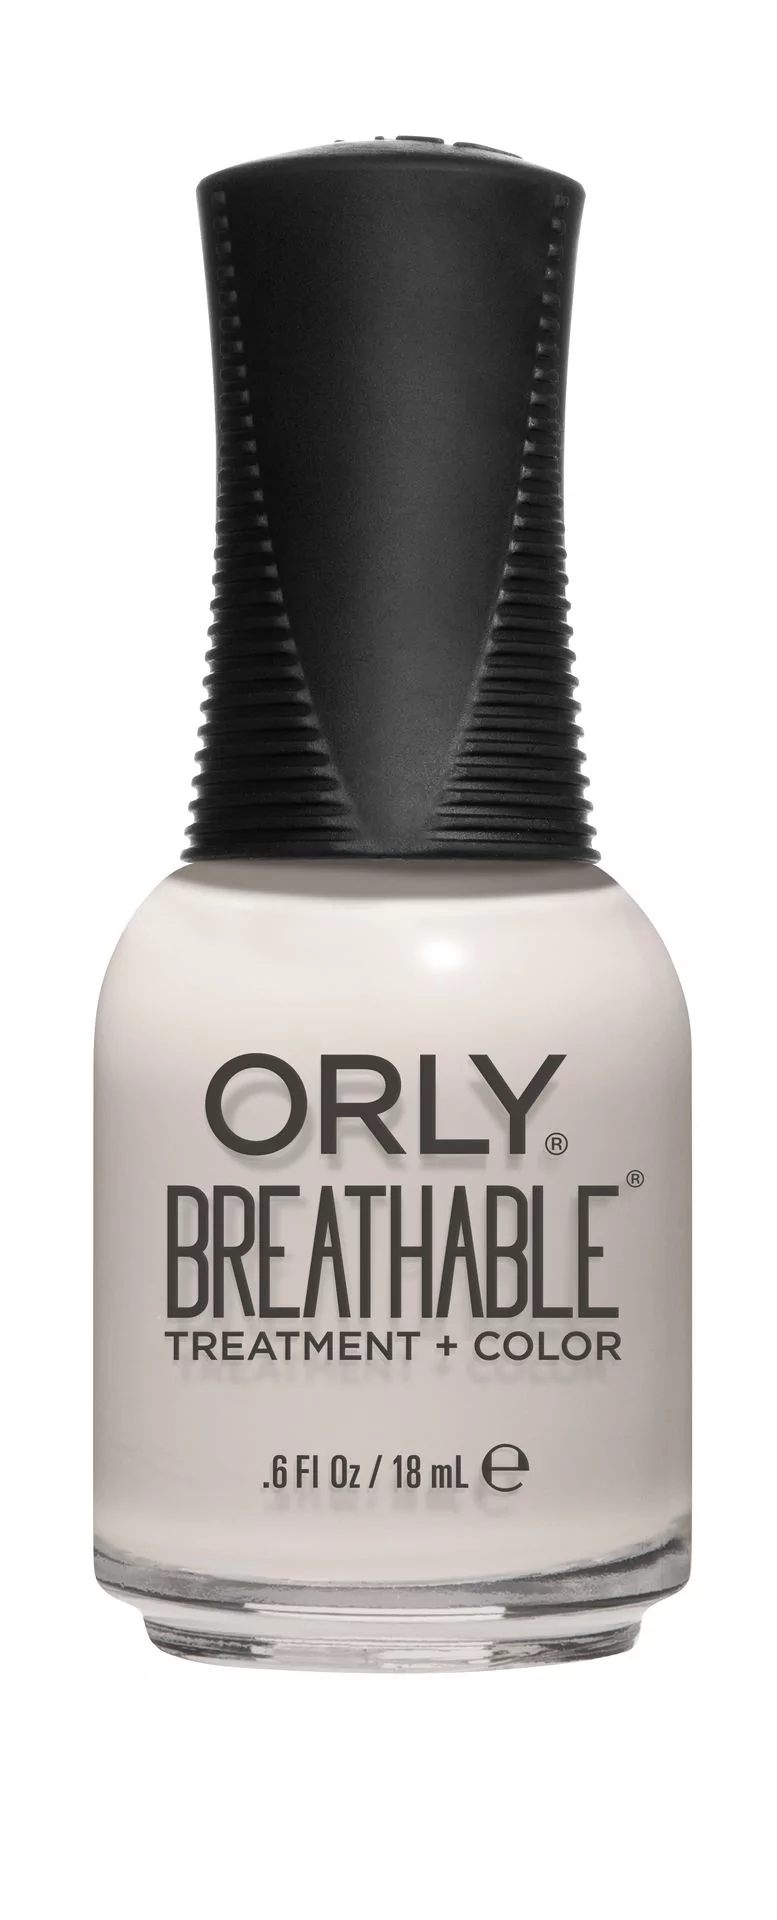 ORLY Breathable Lakier do paznokci  Barely There